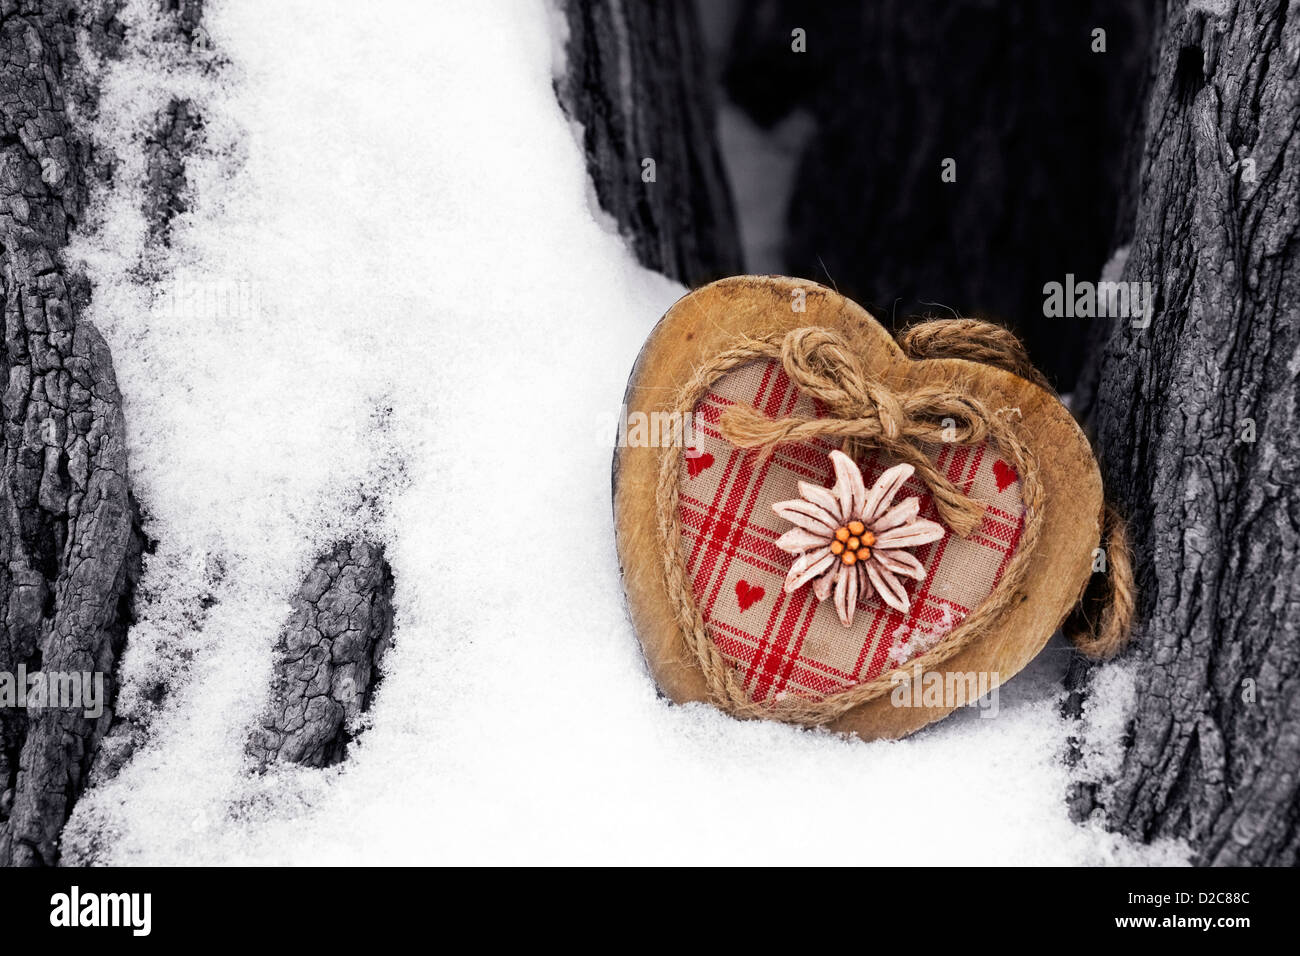 A decorative wooden heart nestled in a snowy tree trunk. Stock Photo